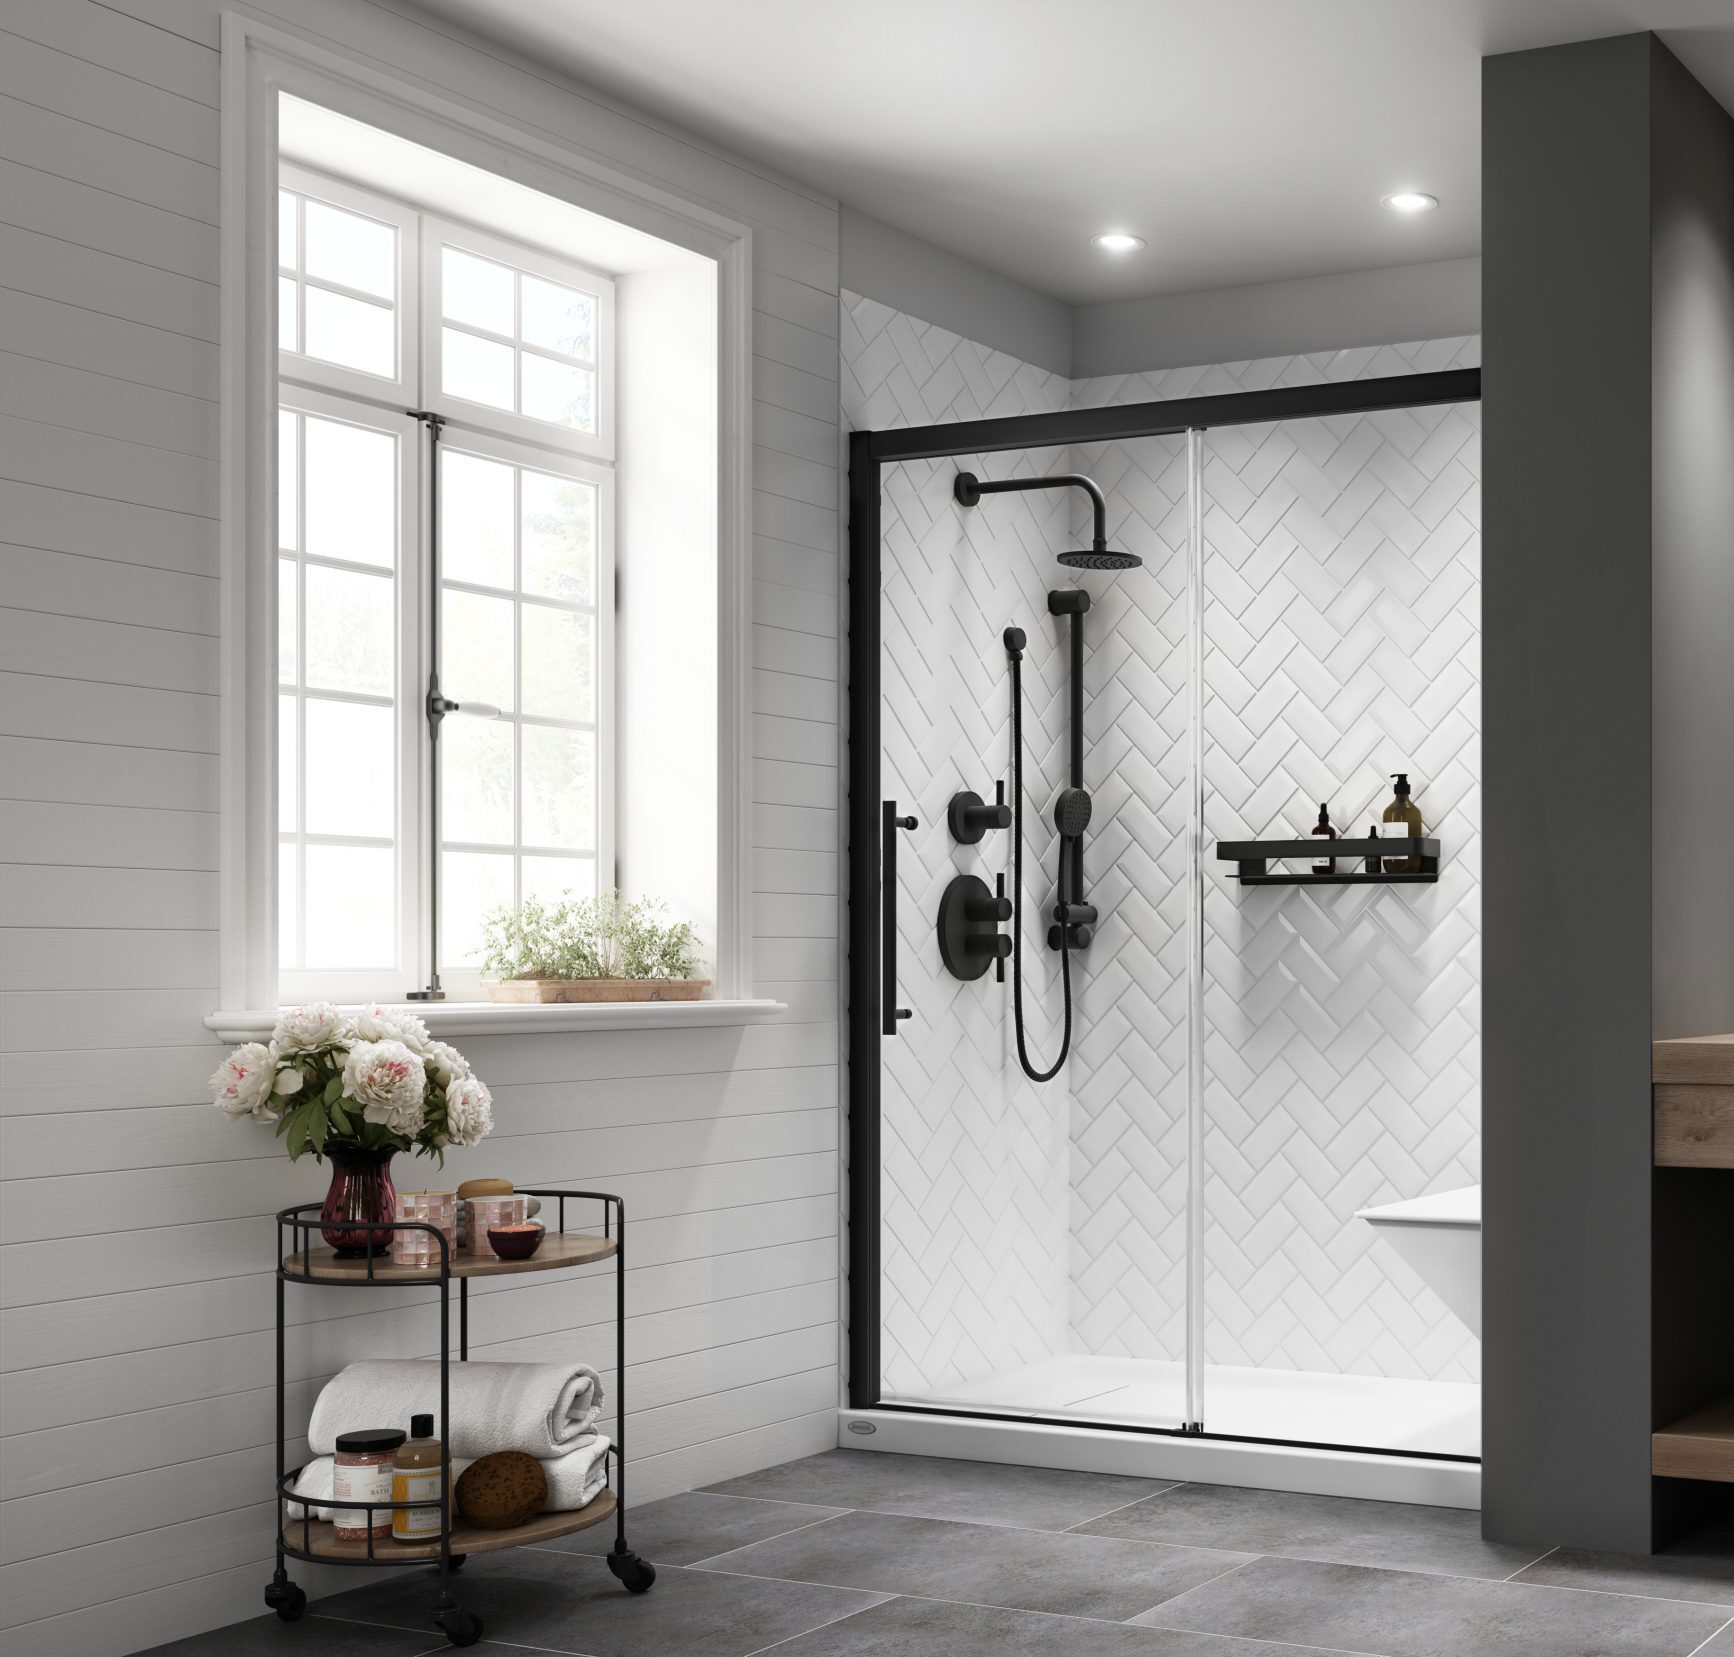 Things to Consider About a Walk-in Shower | BathWorks MI